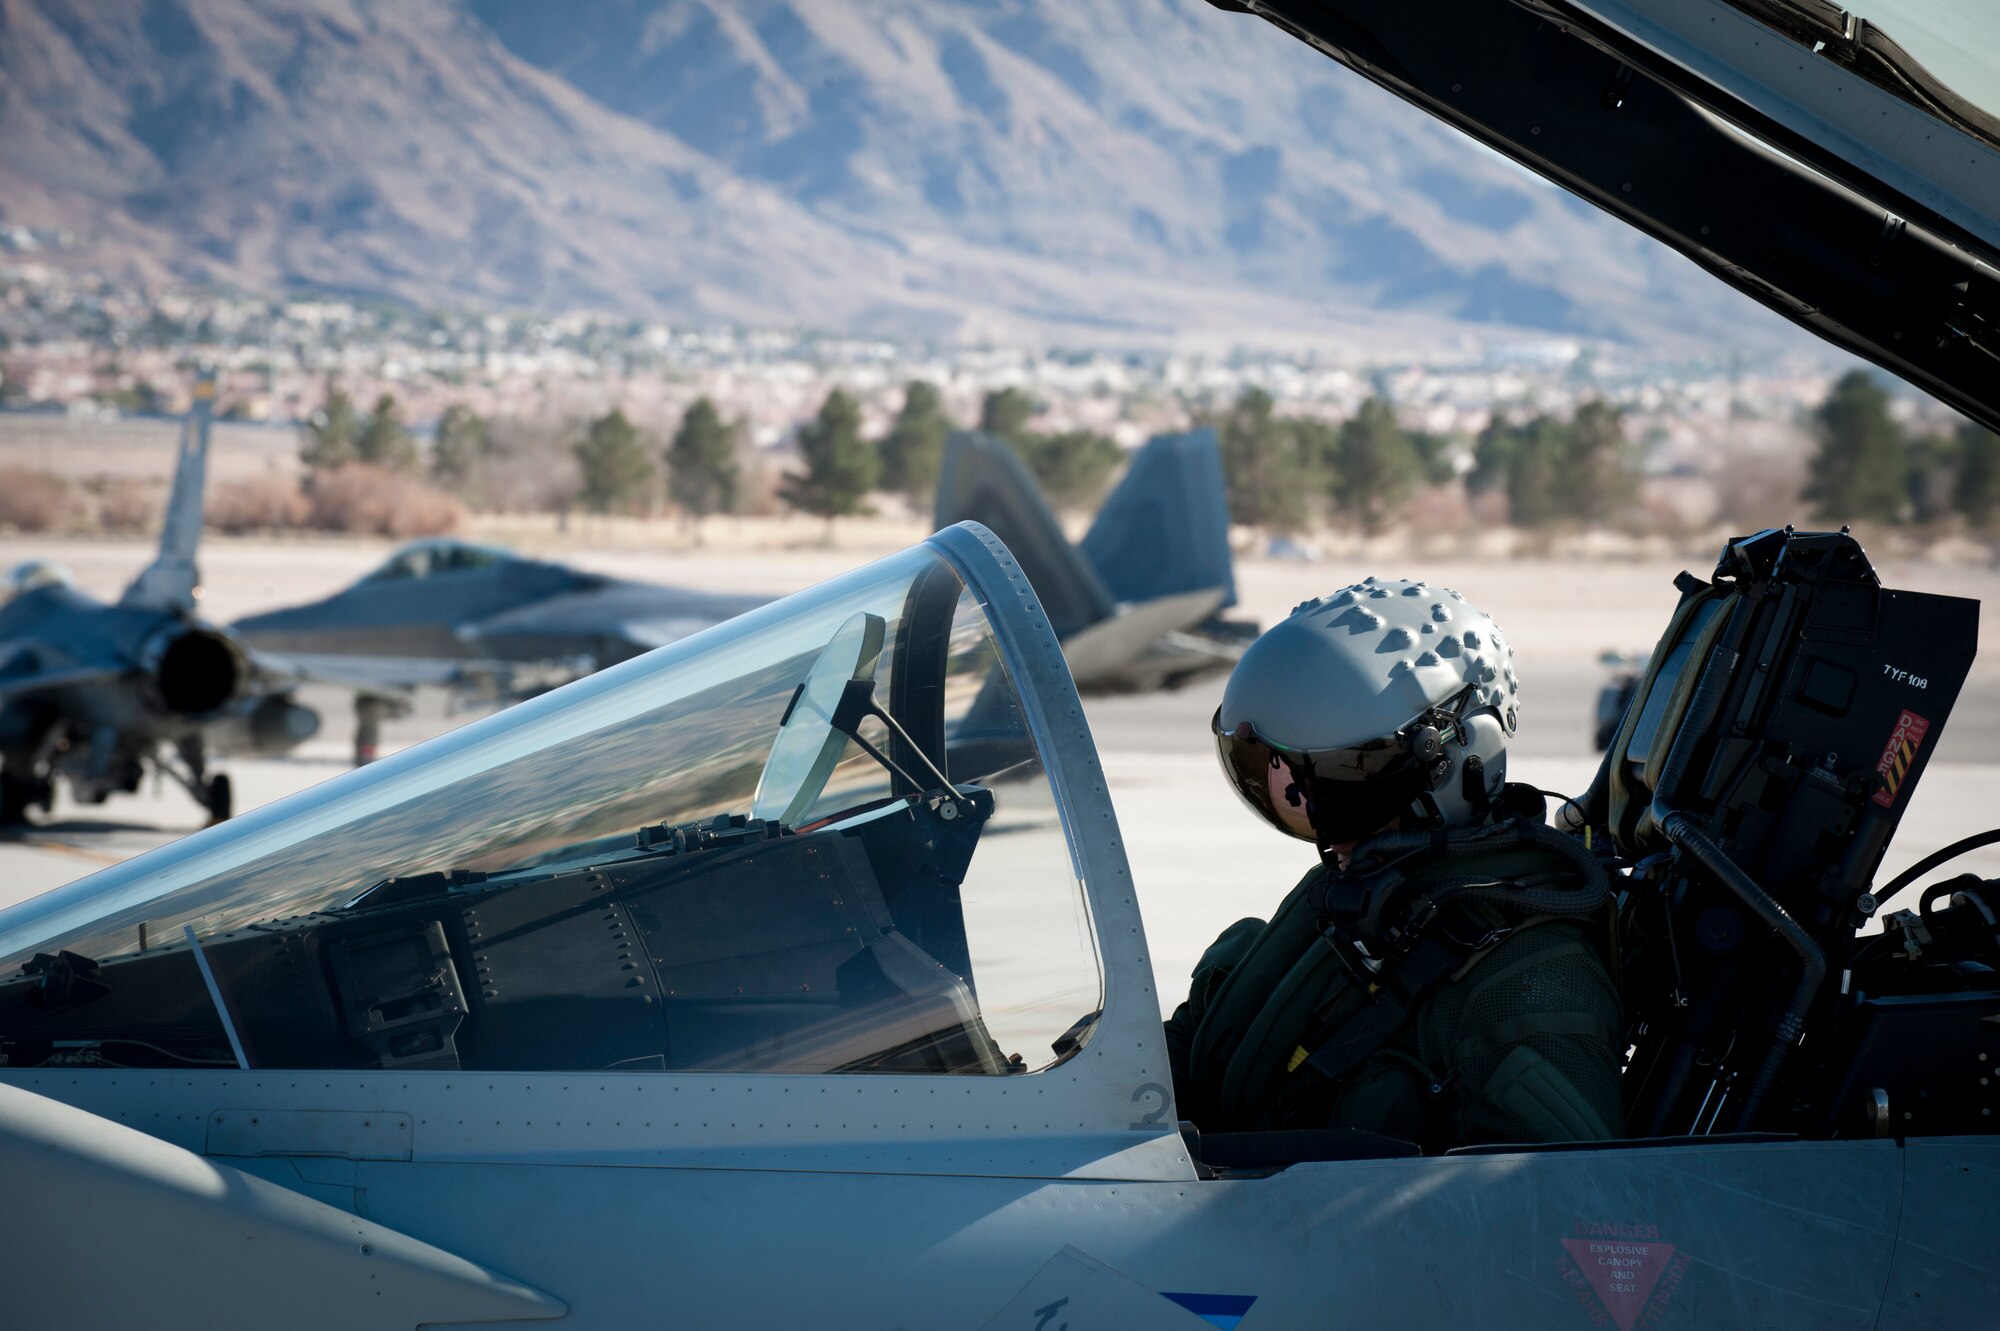 A Royal Air Force pilot assigned to 1 (Fighter) Squadron, RAF Lossiemouth, Scotland, performs pre-flight checks on his Typhoon FGR4 fighter prior to a Red Flag training sortie at Nellis Air Force Base, Nev., Feb. 2, 2015. During this iteration of Red Flag, Nellis AFB hosted the world’s oldest fighter unit. Britain’s No. 1 Squadron originally established in 1912. (U.S. Air Force photo by Airman 1st Class Joshua Kleinholz)